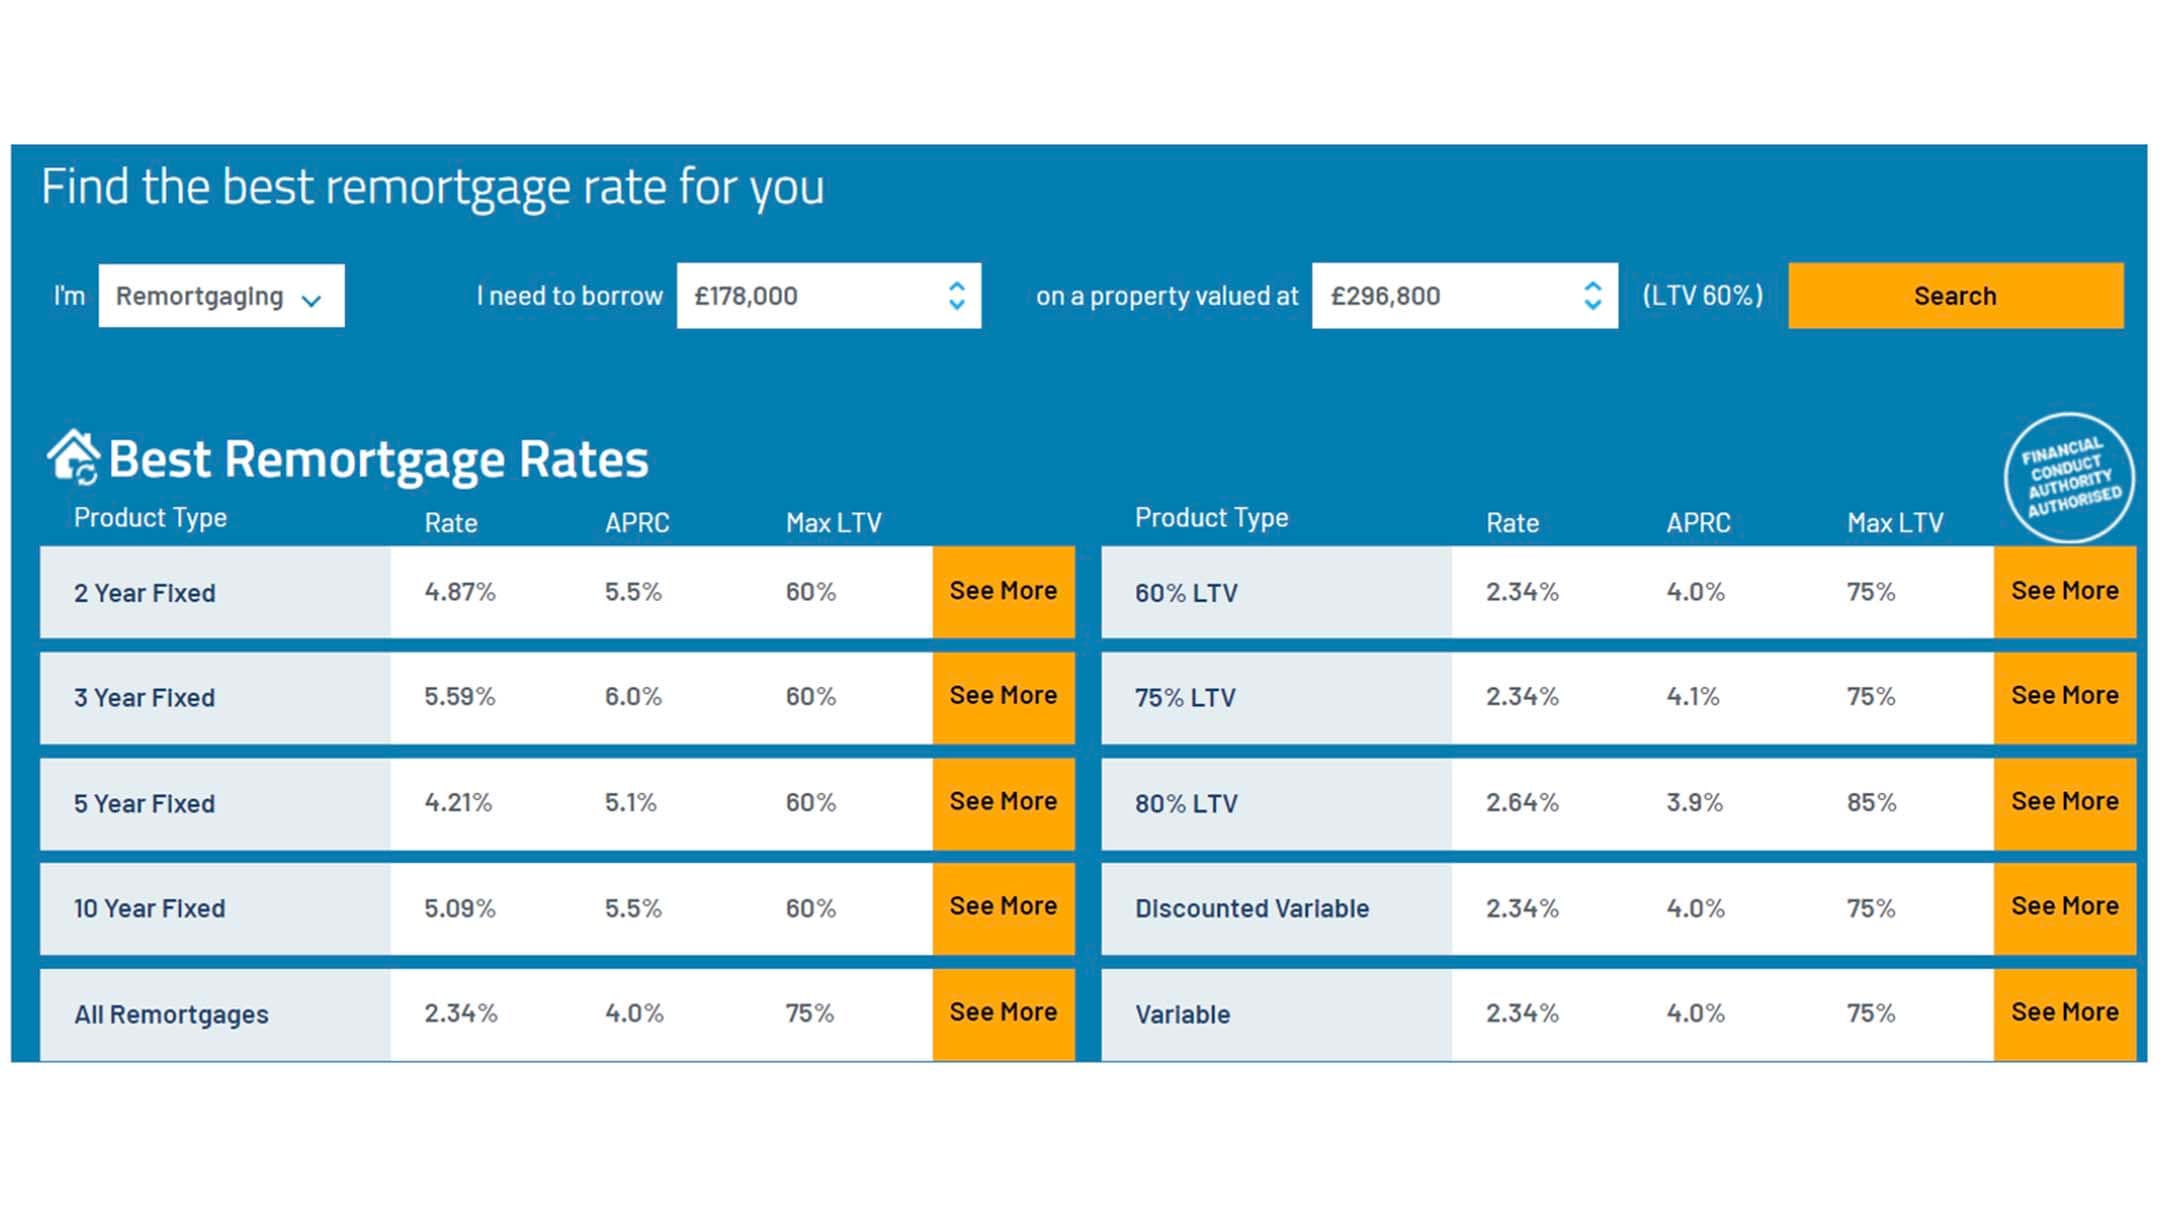 Find the best remortgage rate for you